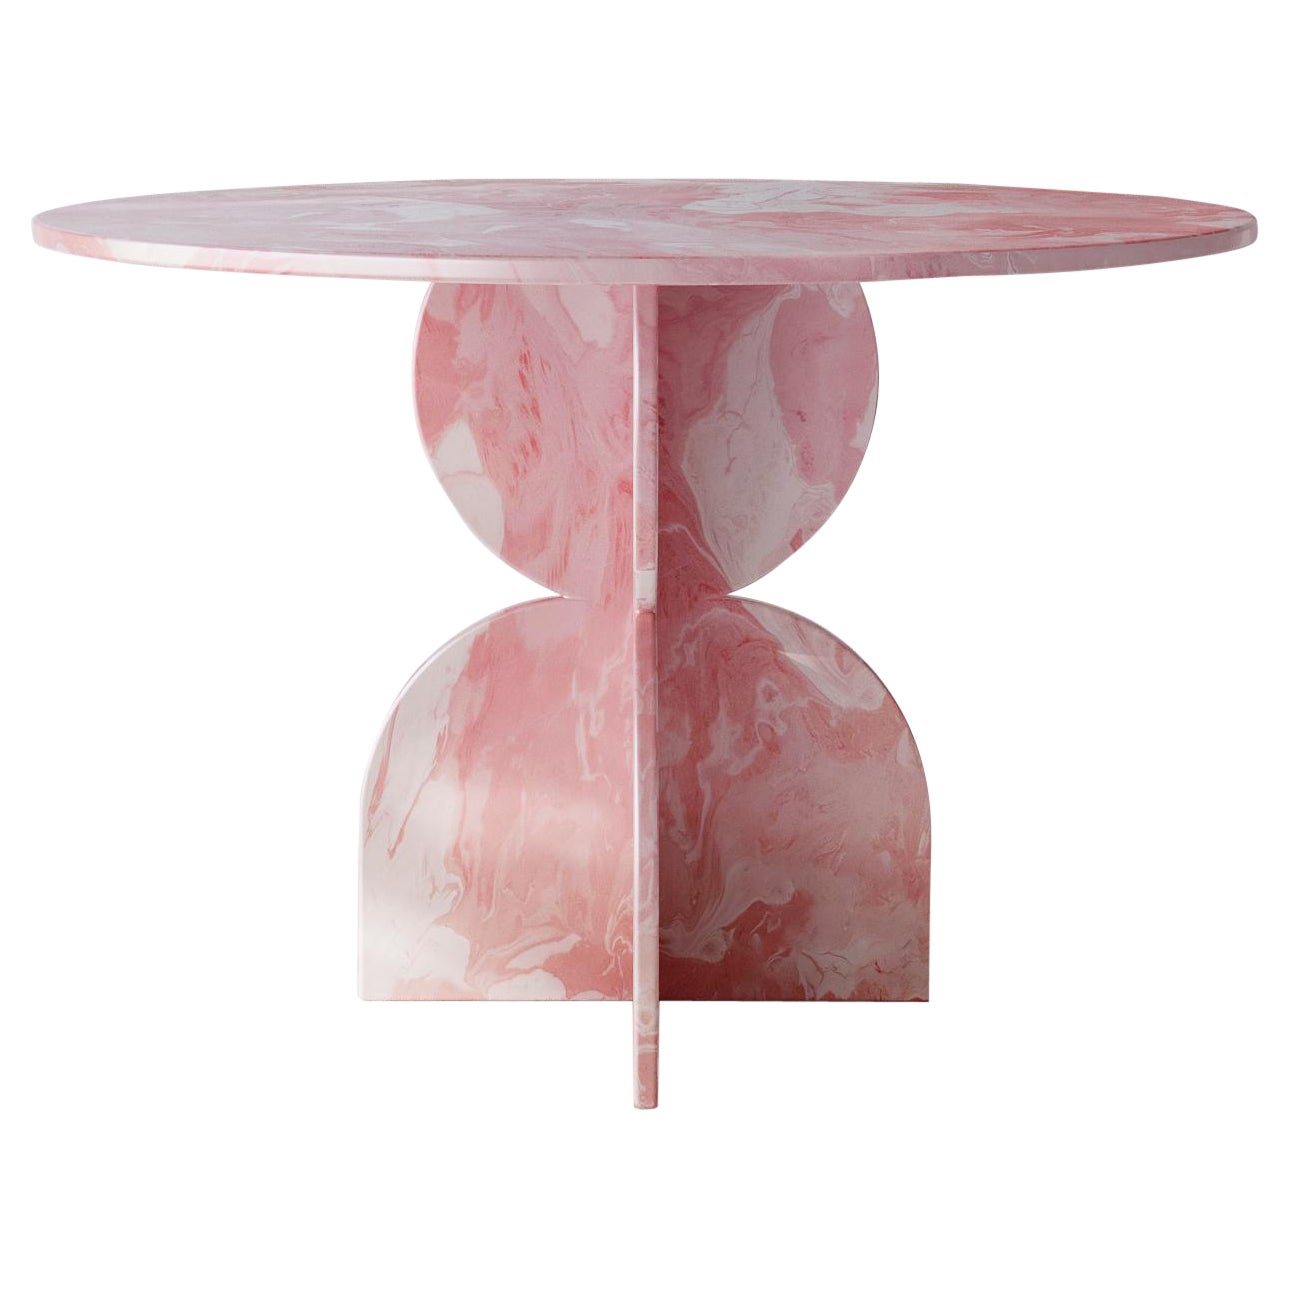 Contemporary Pink Round Table Hand-Crafted 100% Recycled Plastic by Anqa Studios For Sale